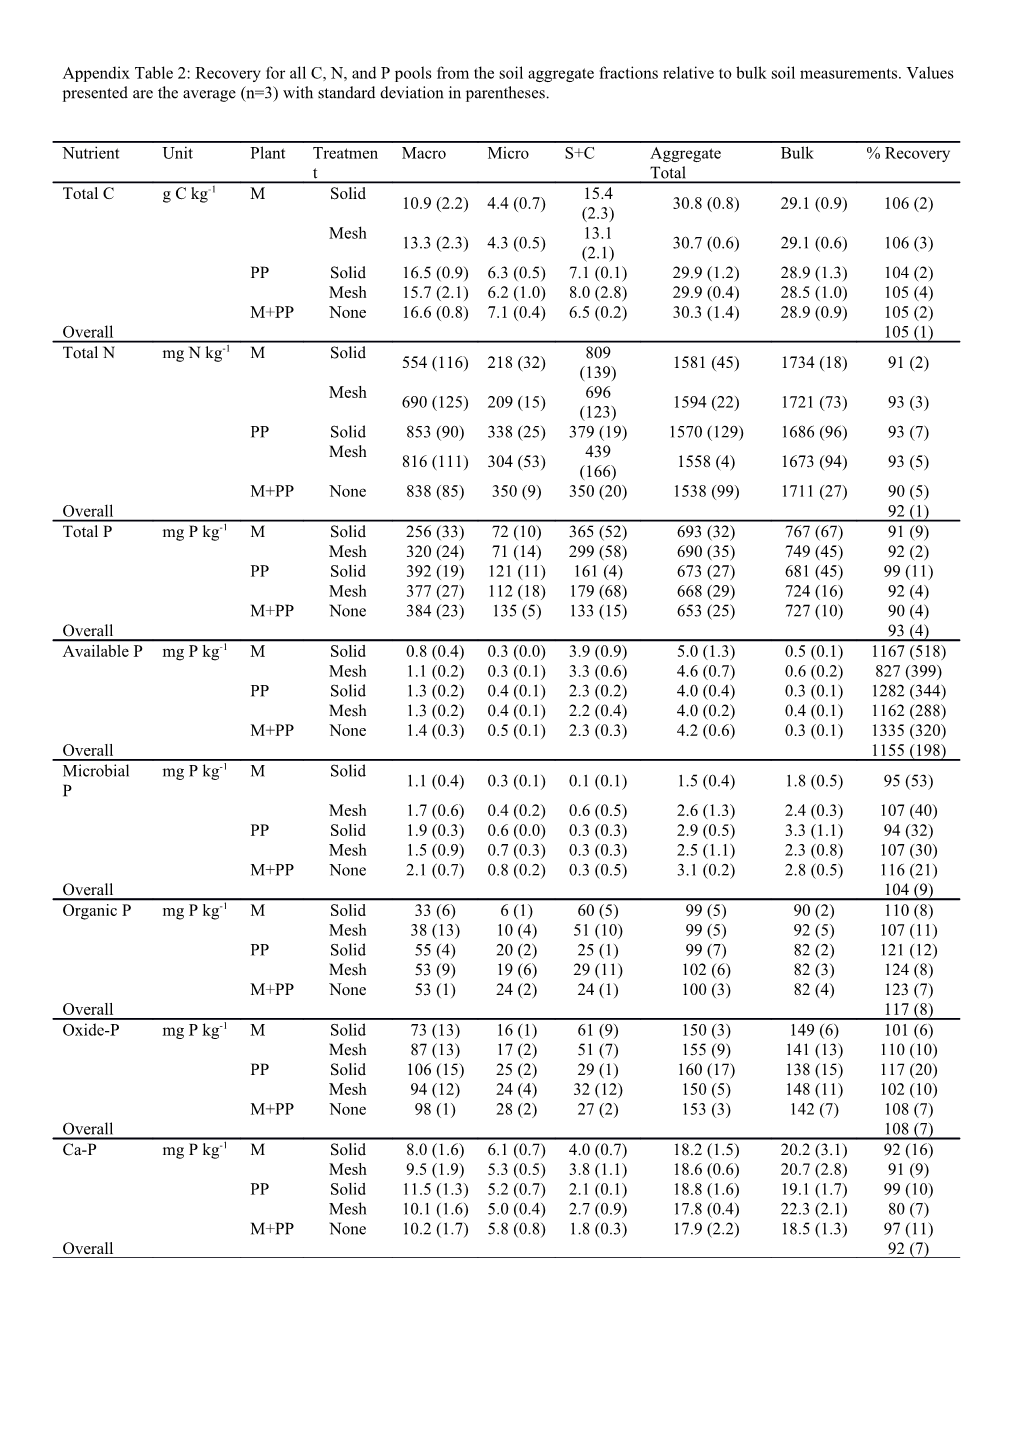 Appendix Table 2: Recovery for All C, N, and P Pools from the Soil Aggregate Fractions